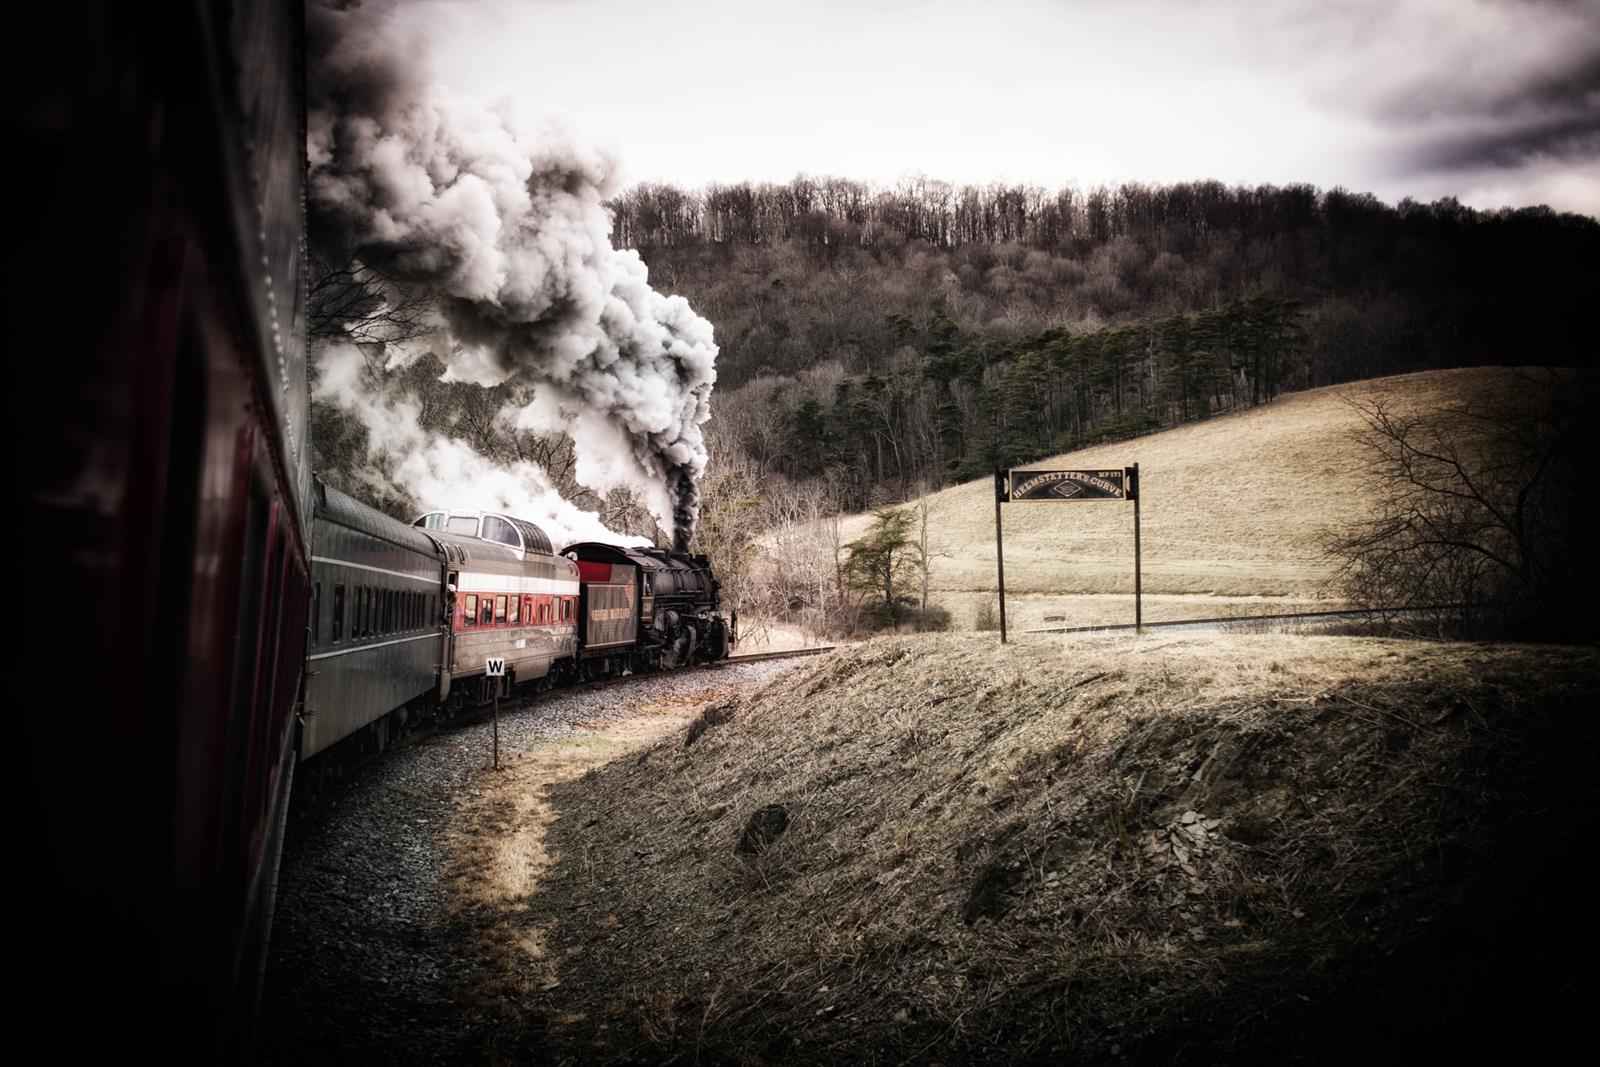 WMSR 1309 is a class 2-6-6-2 Steam Engine and  is pictured in Cumberland, Maryland, United States.  This was taken along the Western Maryland Scenic Railroad on the Western Maryland Scenic Railroad. Photo Copyright: Jessica Schulte uploaded to Railroad Gallery on 01/09/2023. This photograph of WMSR 1309 was taken on Saturday, January 07, 2023. All Rights Reserved. 